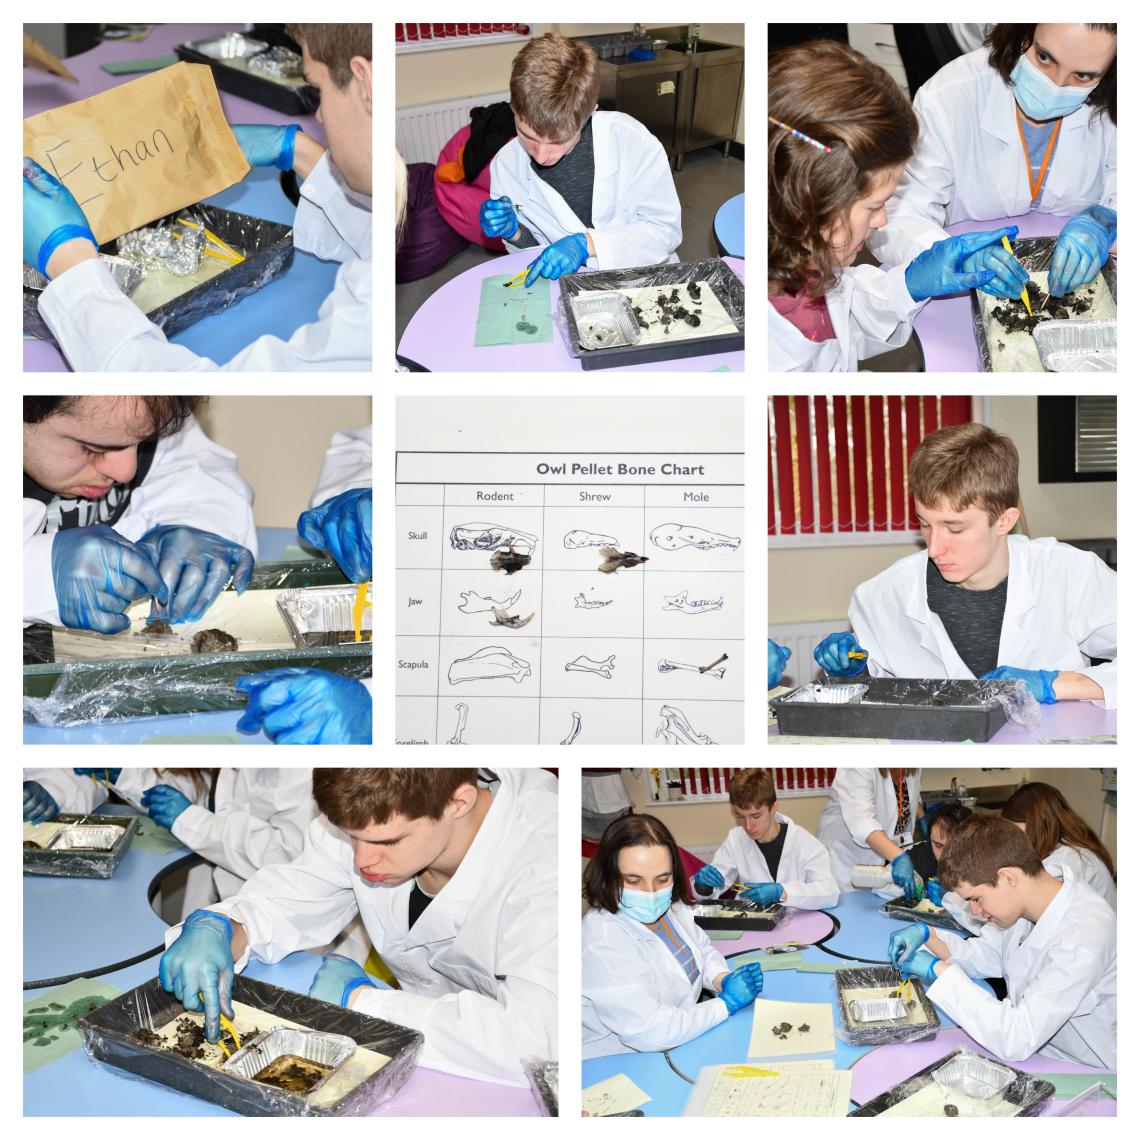 Learners dissecting barn owl pellets